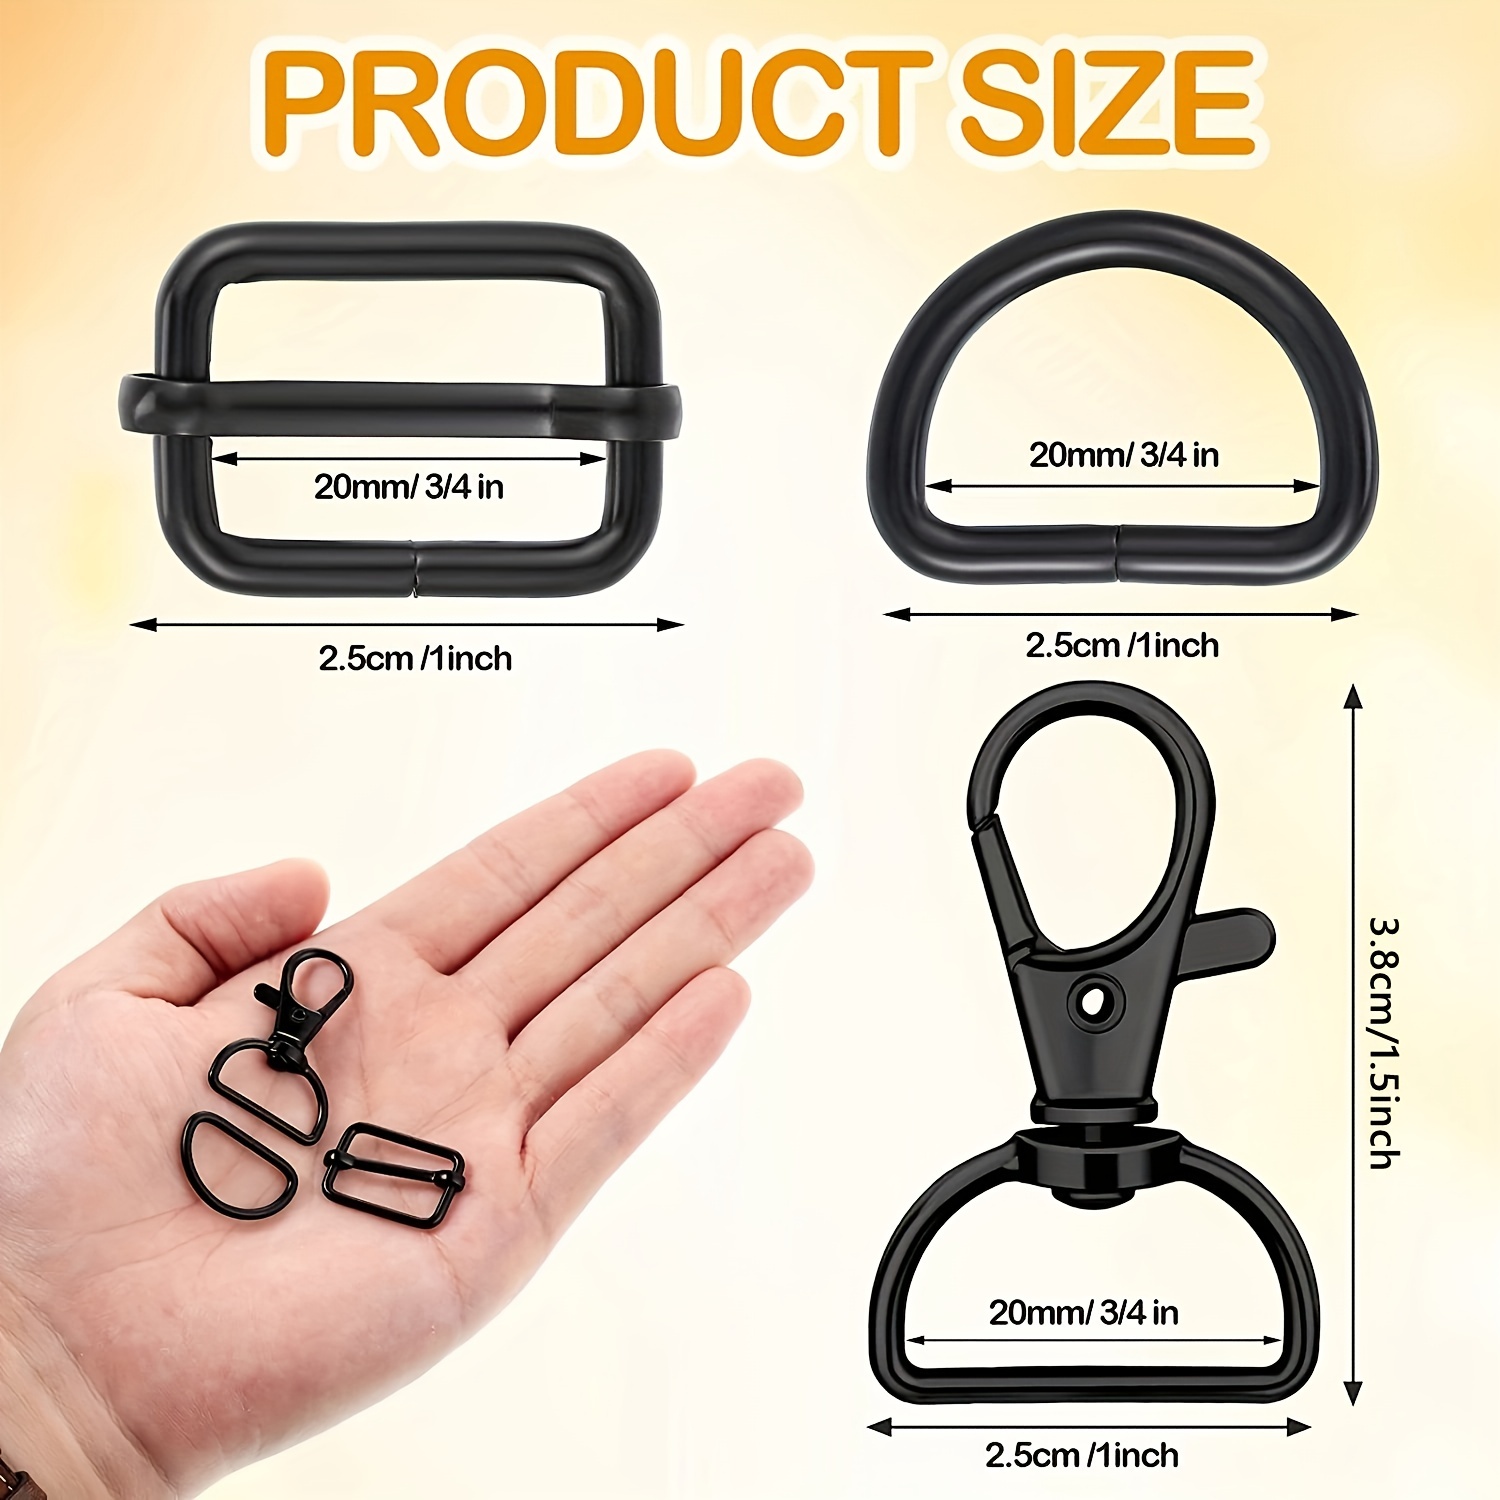 Zinc Metal Snap Hook Lobster Clasp Collar Buckles For DIY Keychains And  Bags 15/20/25/32mm/38mm Sizes Available From Kaniso, $5.53